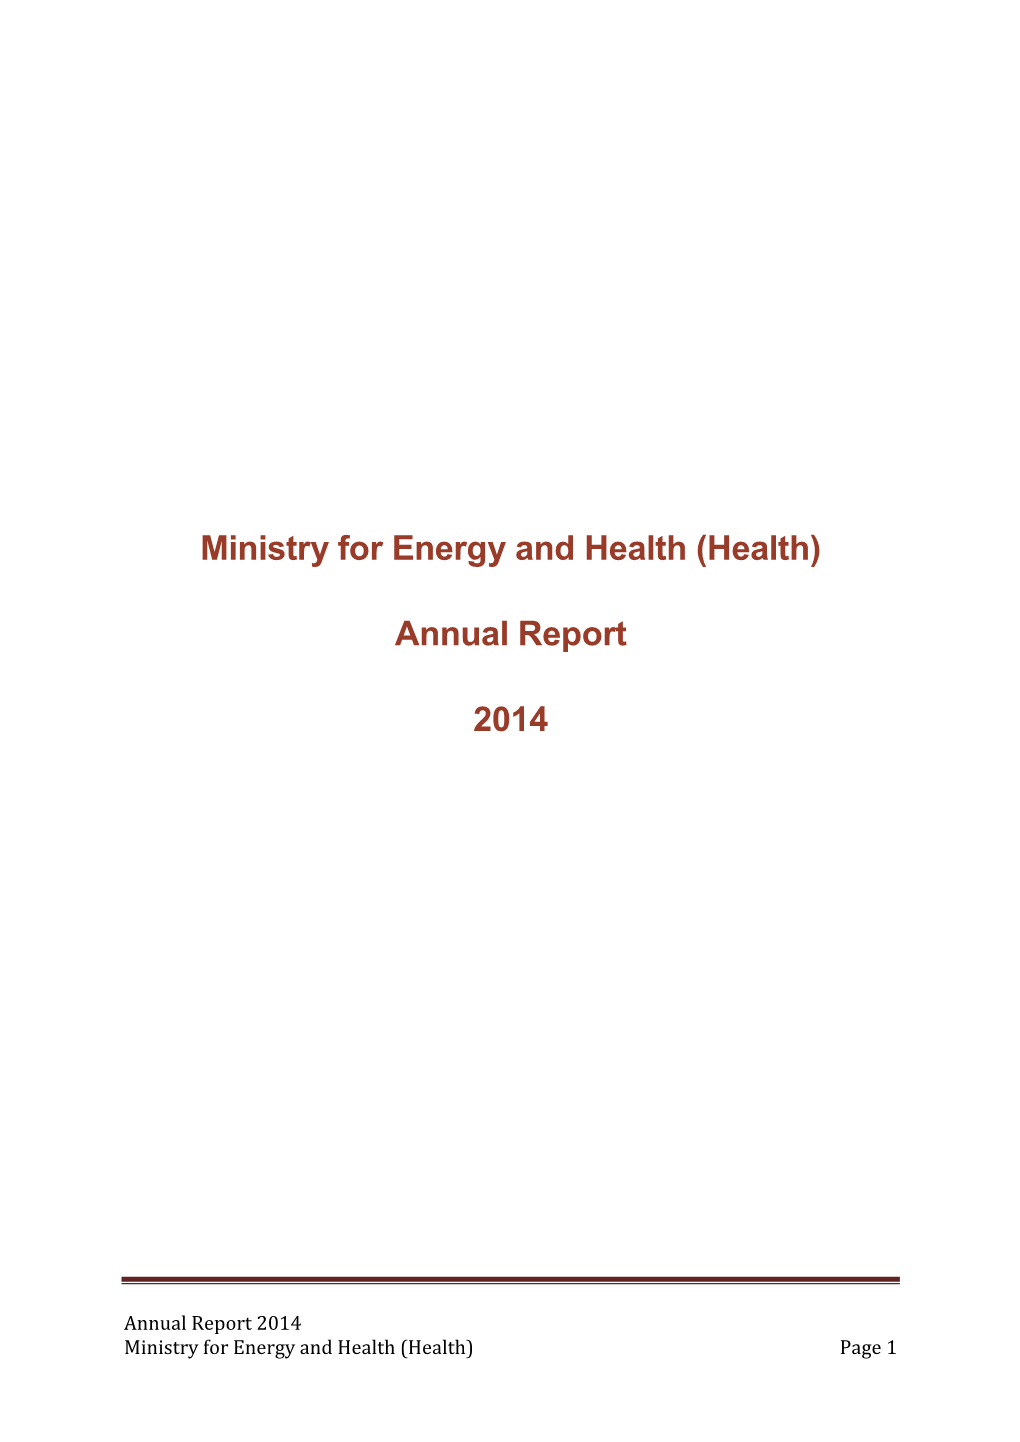 Ministry for Energy and Health (Health) Annual Report 2014